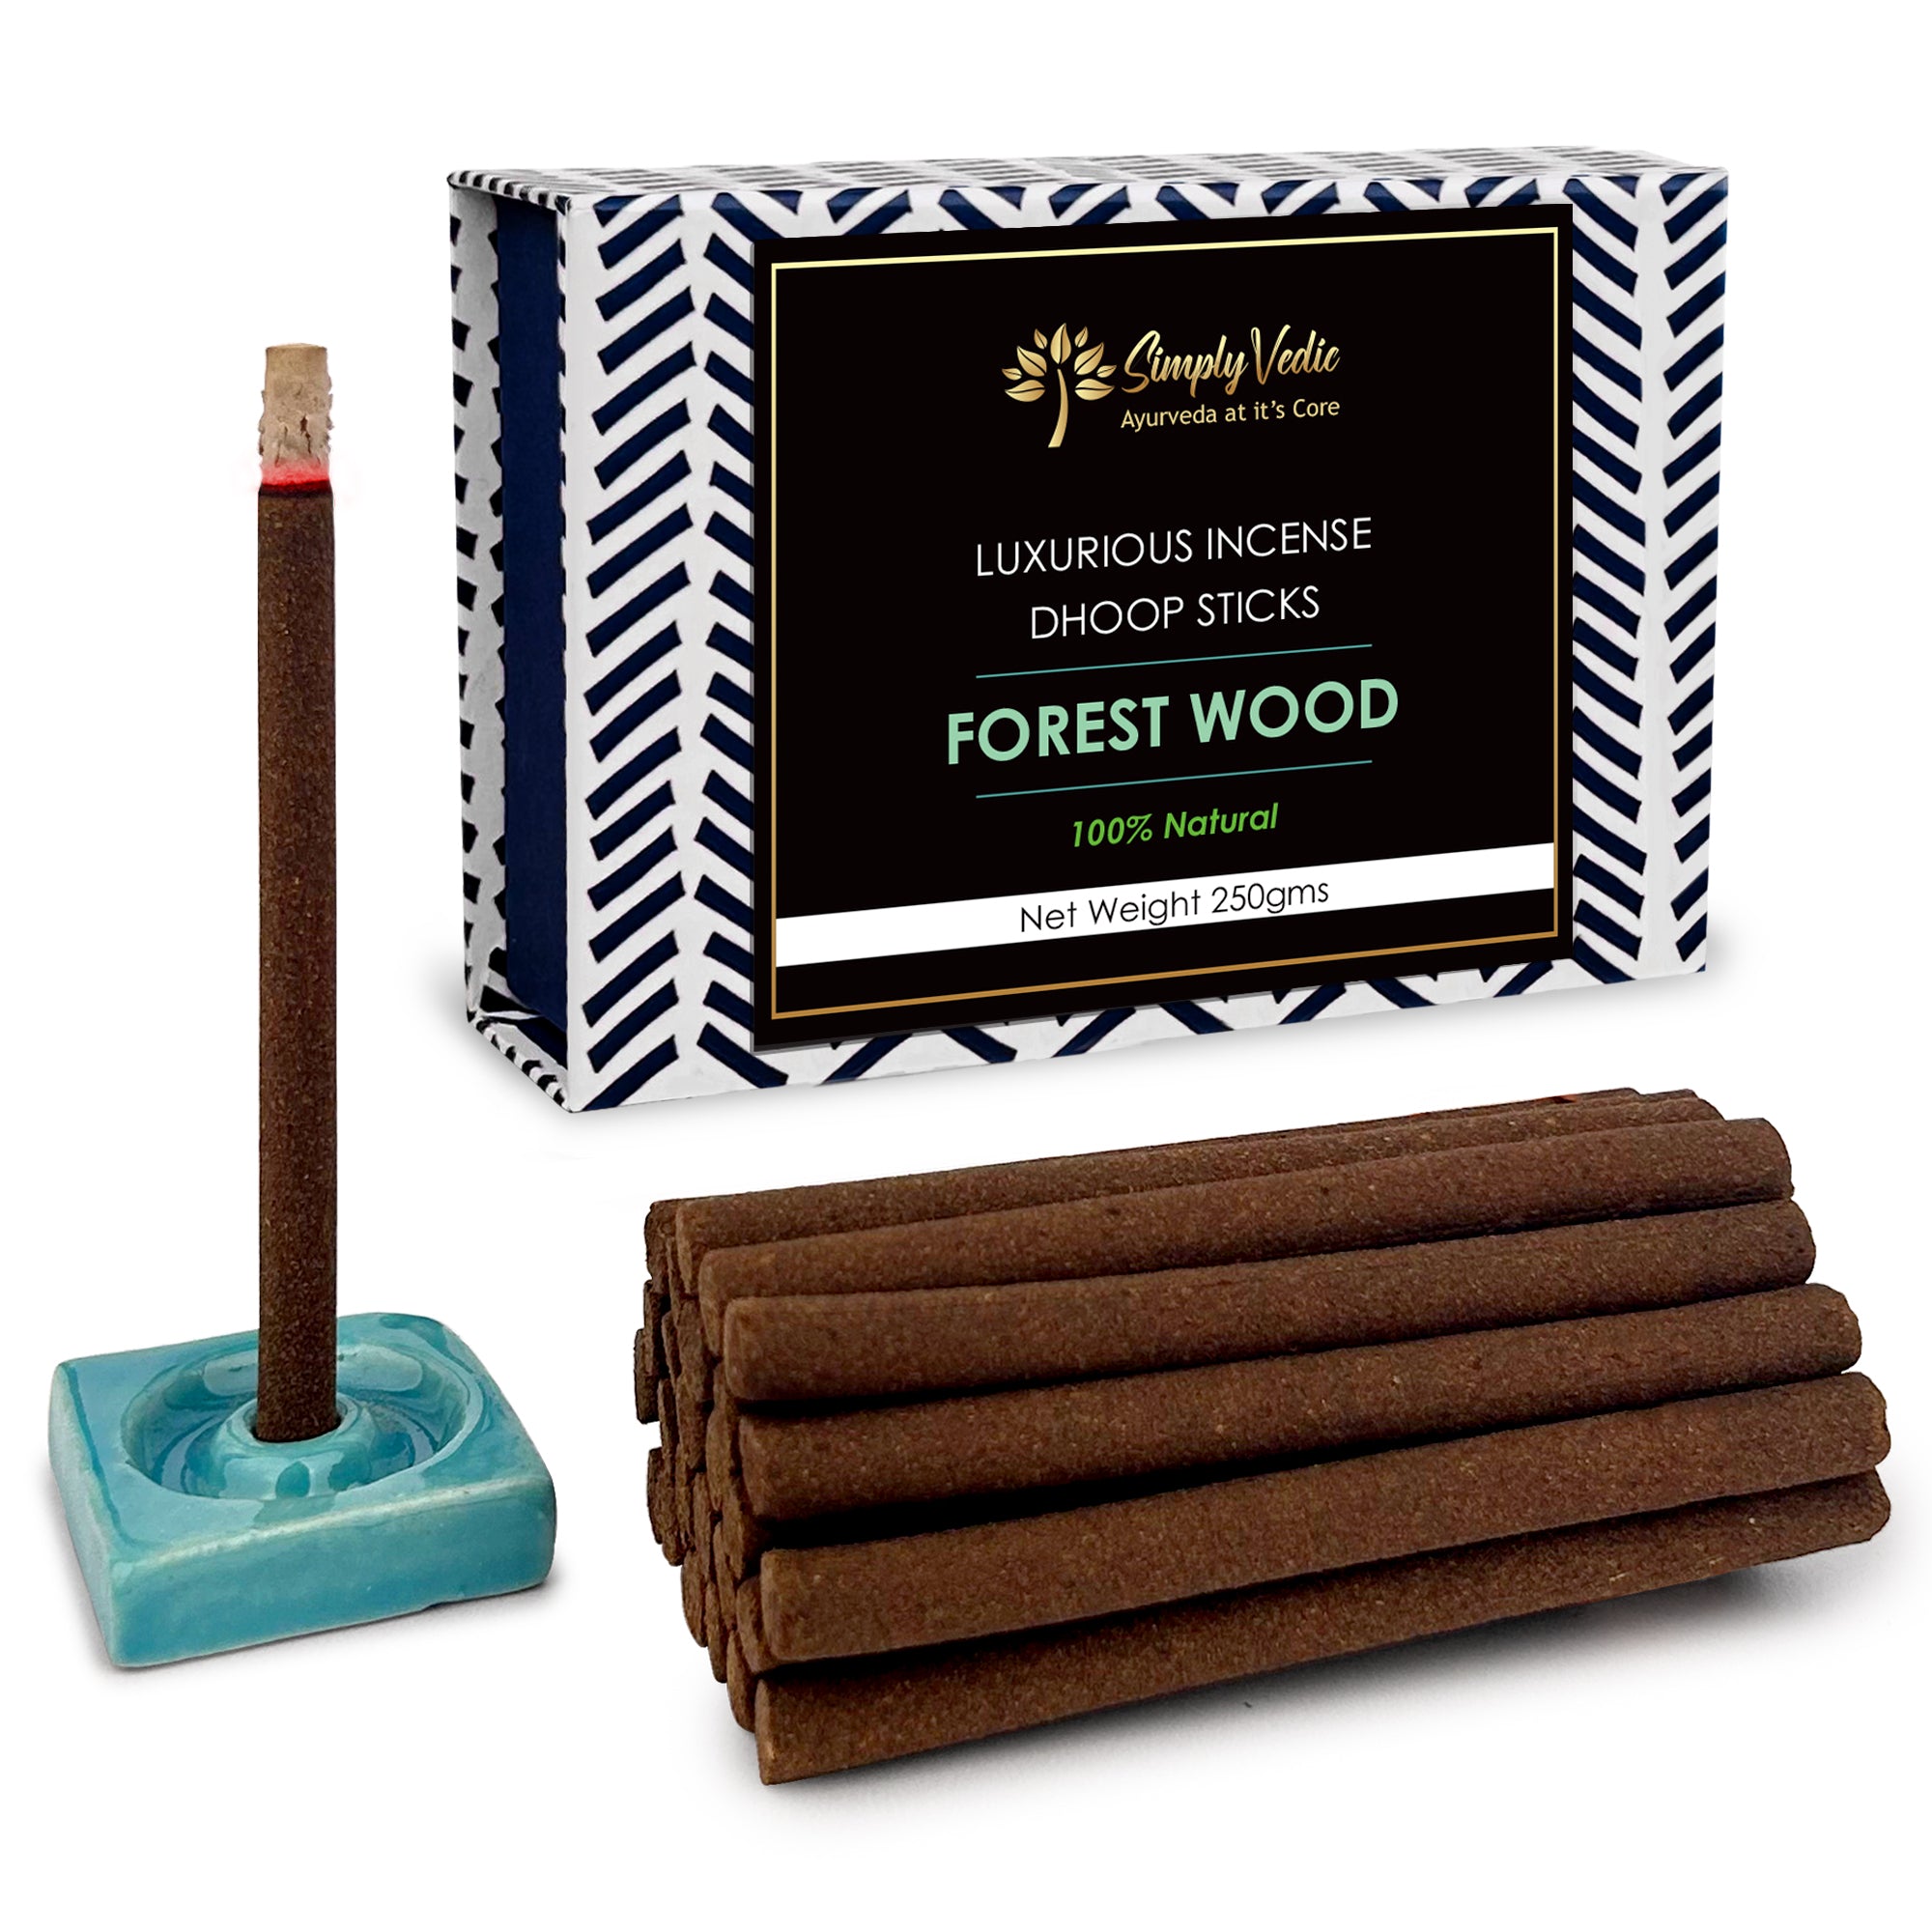 Simply Vedic's Forest Wood Dhoop Sticks